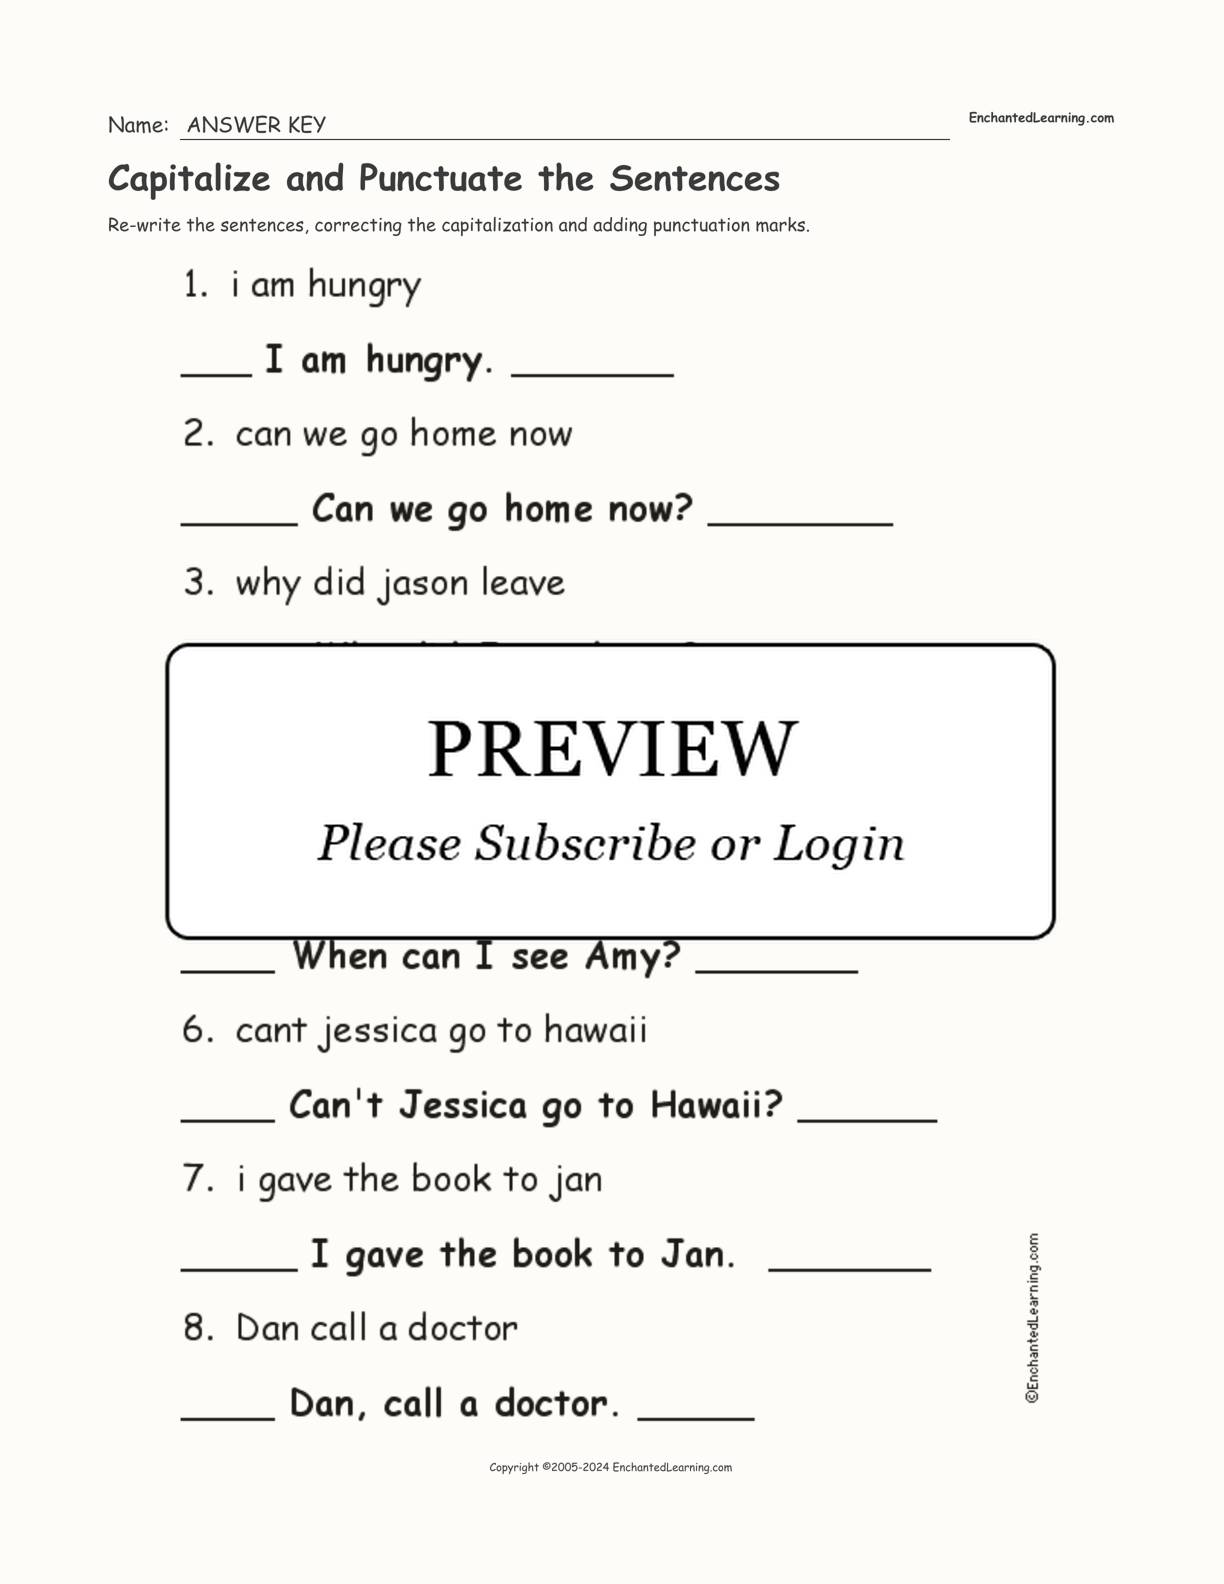 Capitalize and Punctuate the Sentences interactive worksheet page 2